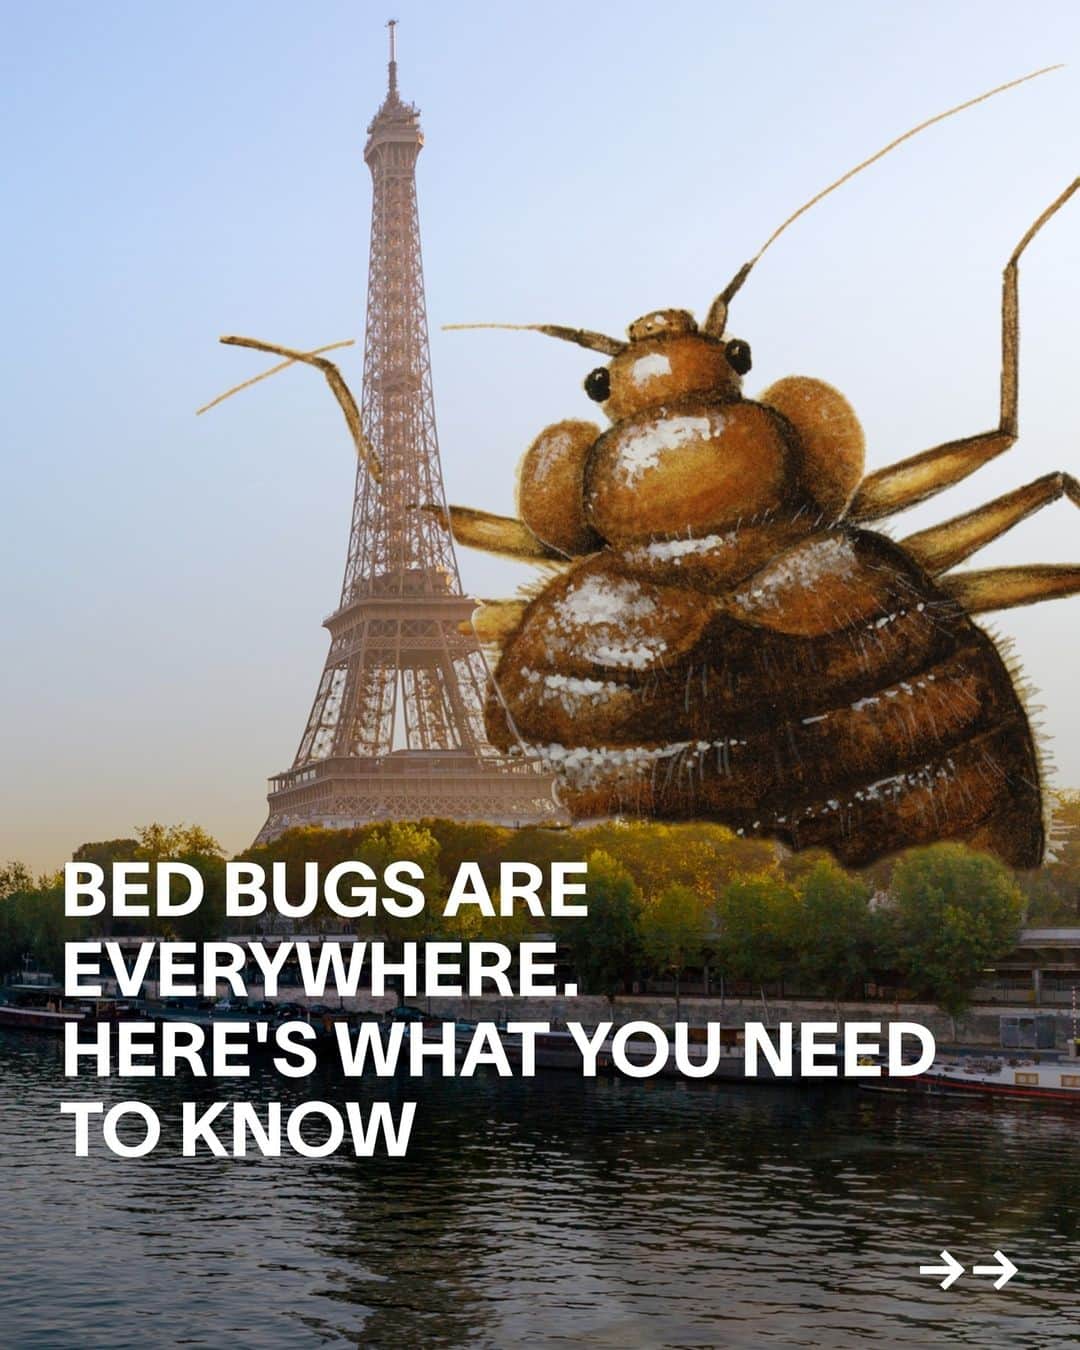 VICEのインスタグラム：「Your Instagram feed may well be covered in bed bugs—they’ve already torn through France and are starting to pop up elsewhere. They’re on public transport, in movie theaters, in your nightmares. Though the whole country’s going through it, Paris has reportedly been most affected, as gnarly photos and videos circulate of infested Parisian infrastructure.⁠ ⁠ But the issue isn’t just local to France: we’re seeing an ongoing increase in many parts of the world. That's partly due to global travel, among other reasons. VICE spoke to Professor James Logan, at the London School of Hygiene and Tropical Medicine, to get some more information on the rise of the bed bugs.」